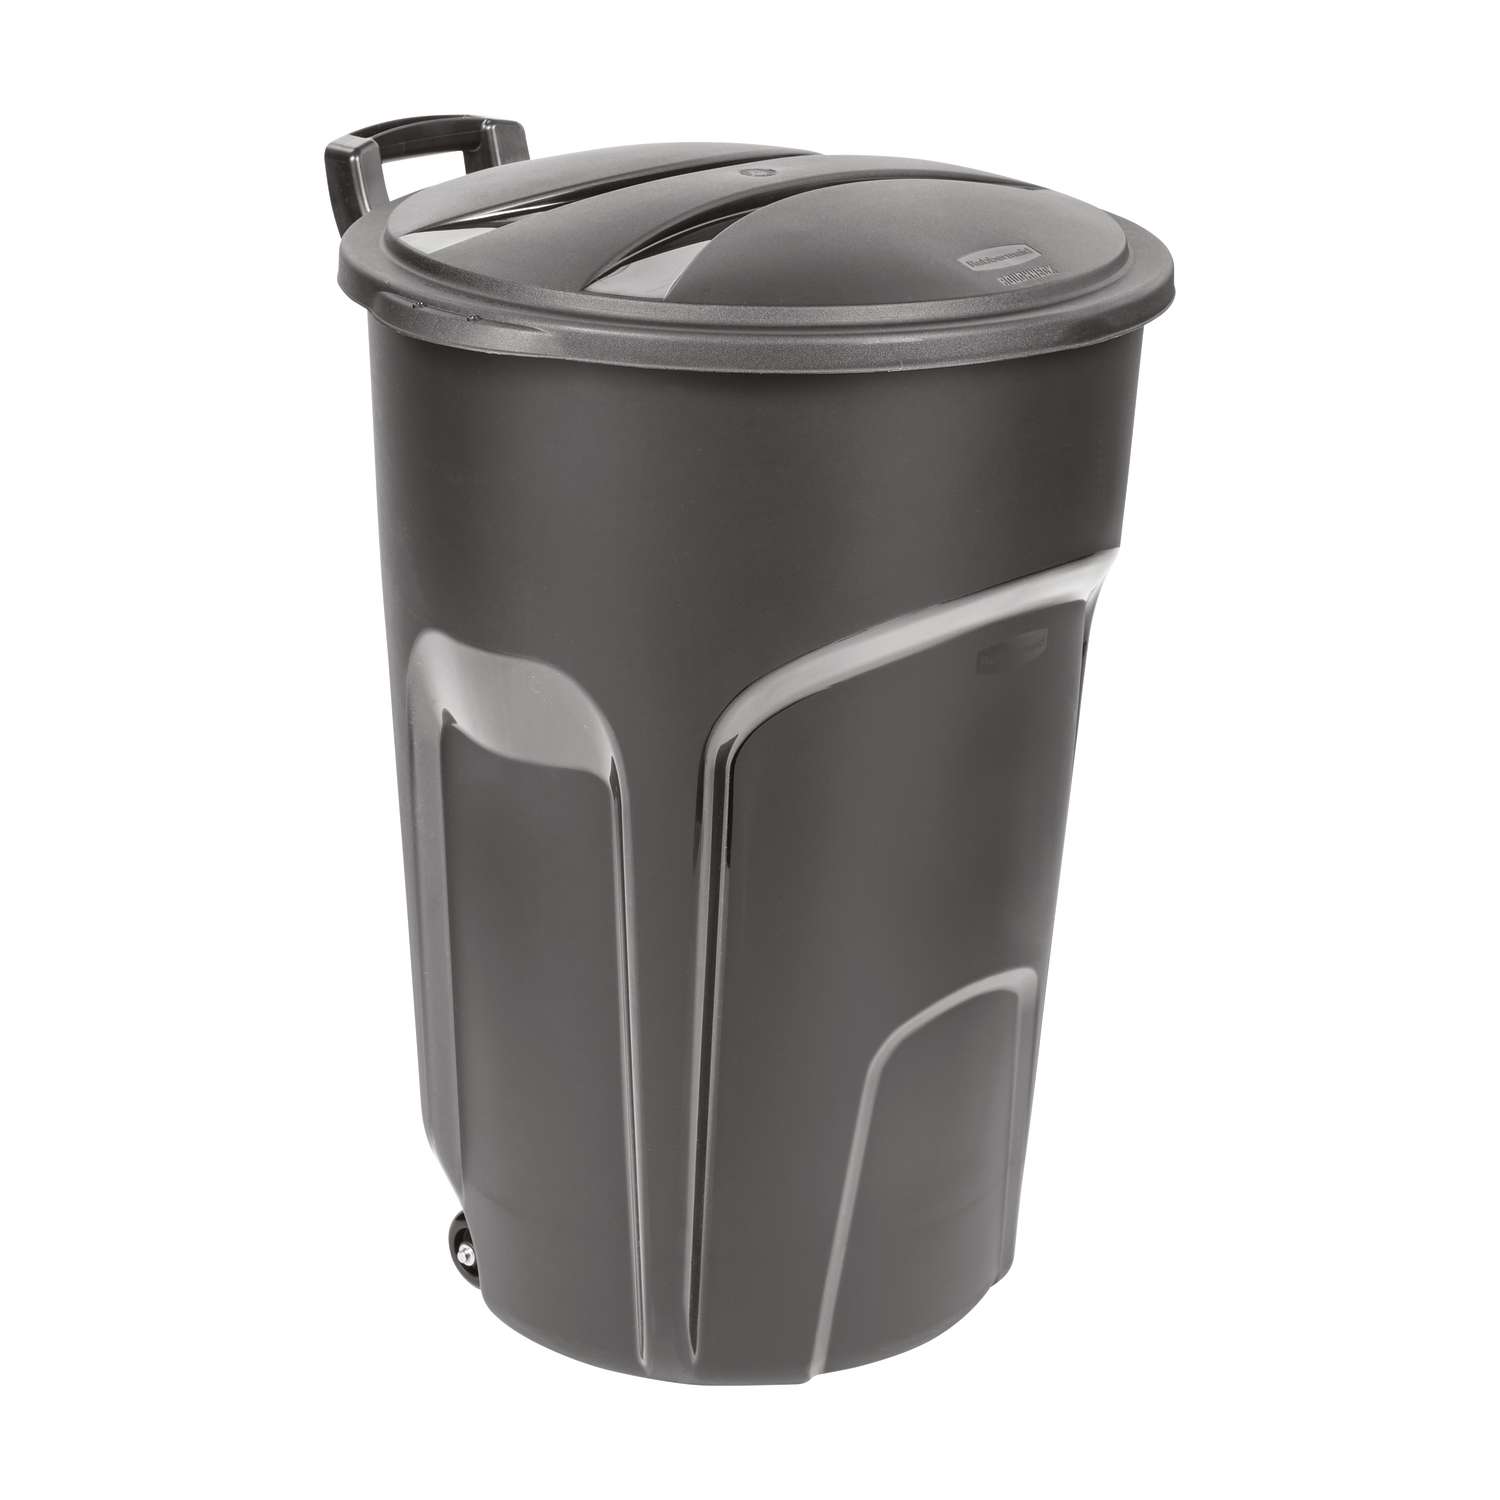 Rubbermaid 32 gal. Resin Wheeled Garbage Can Lid Included